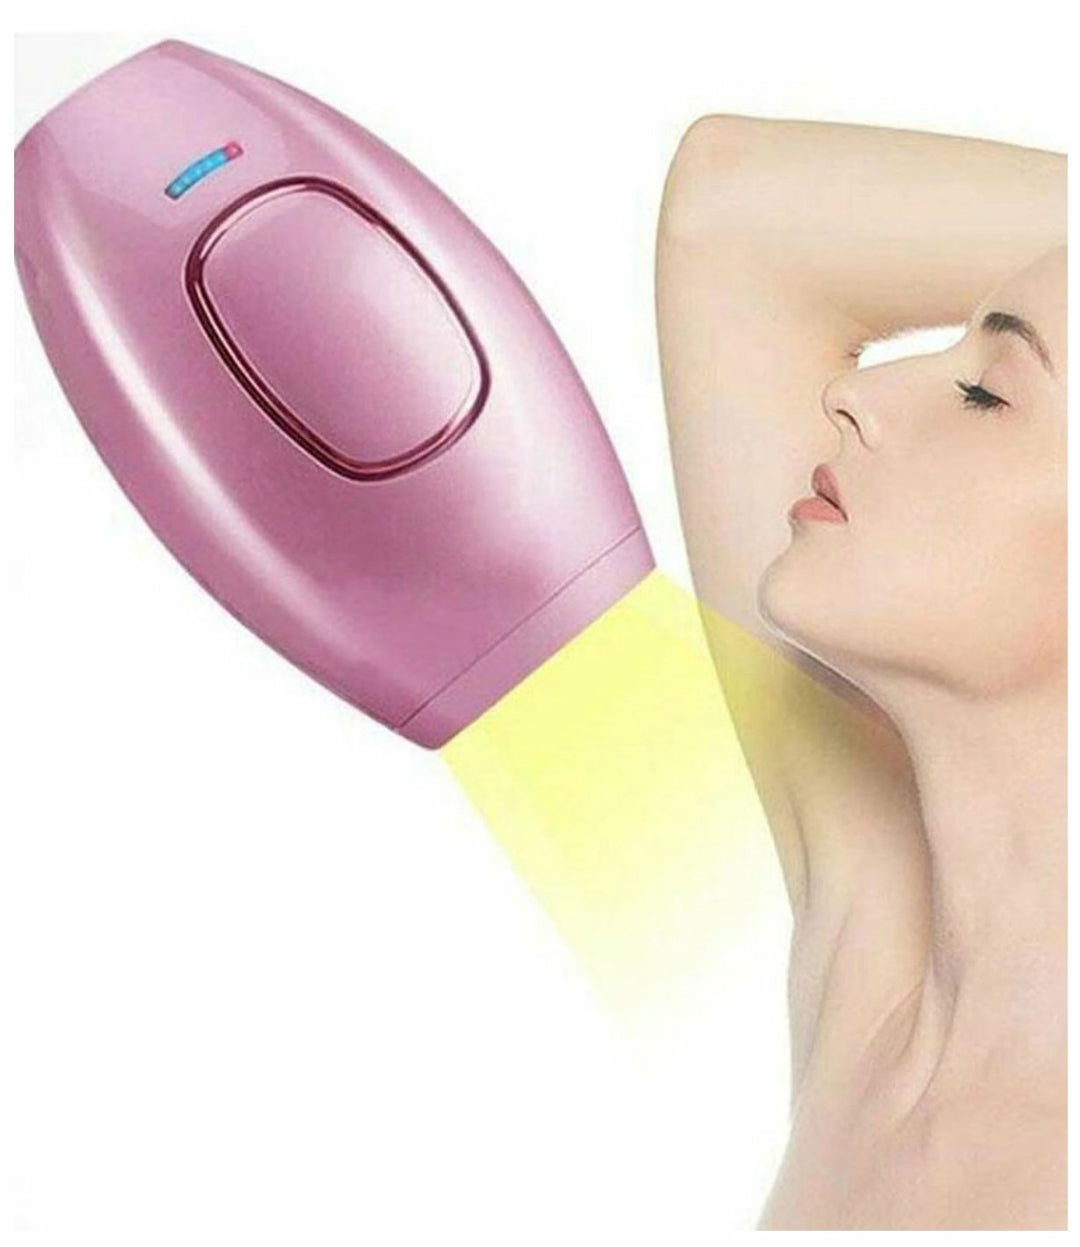 A woman treating her hair with the laser hair removal device